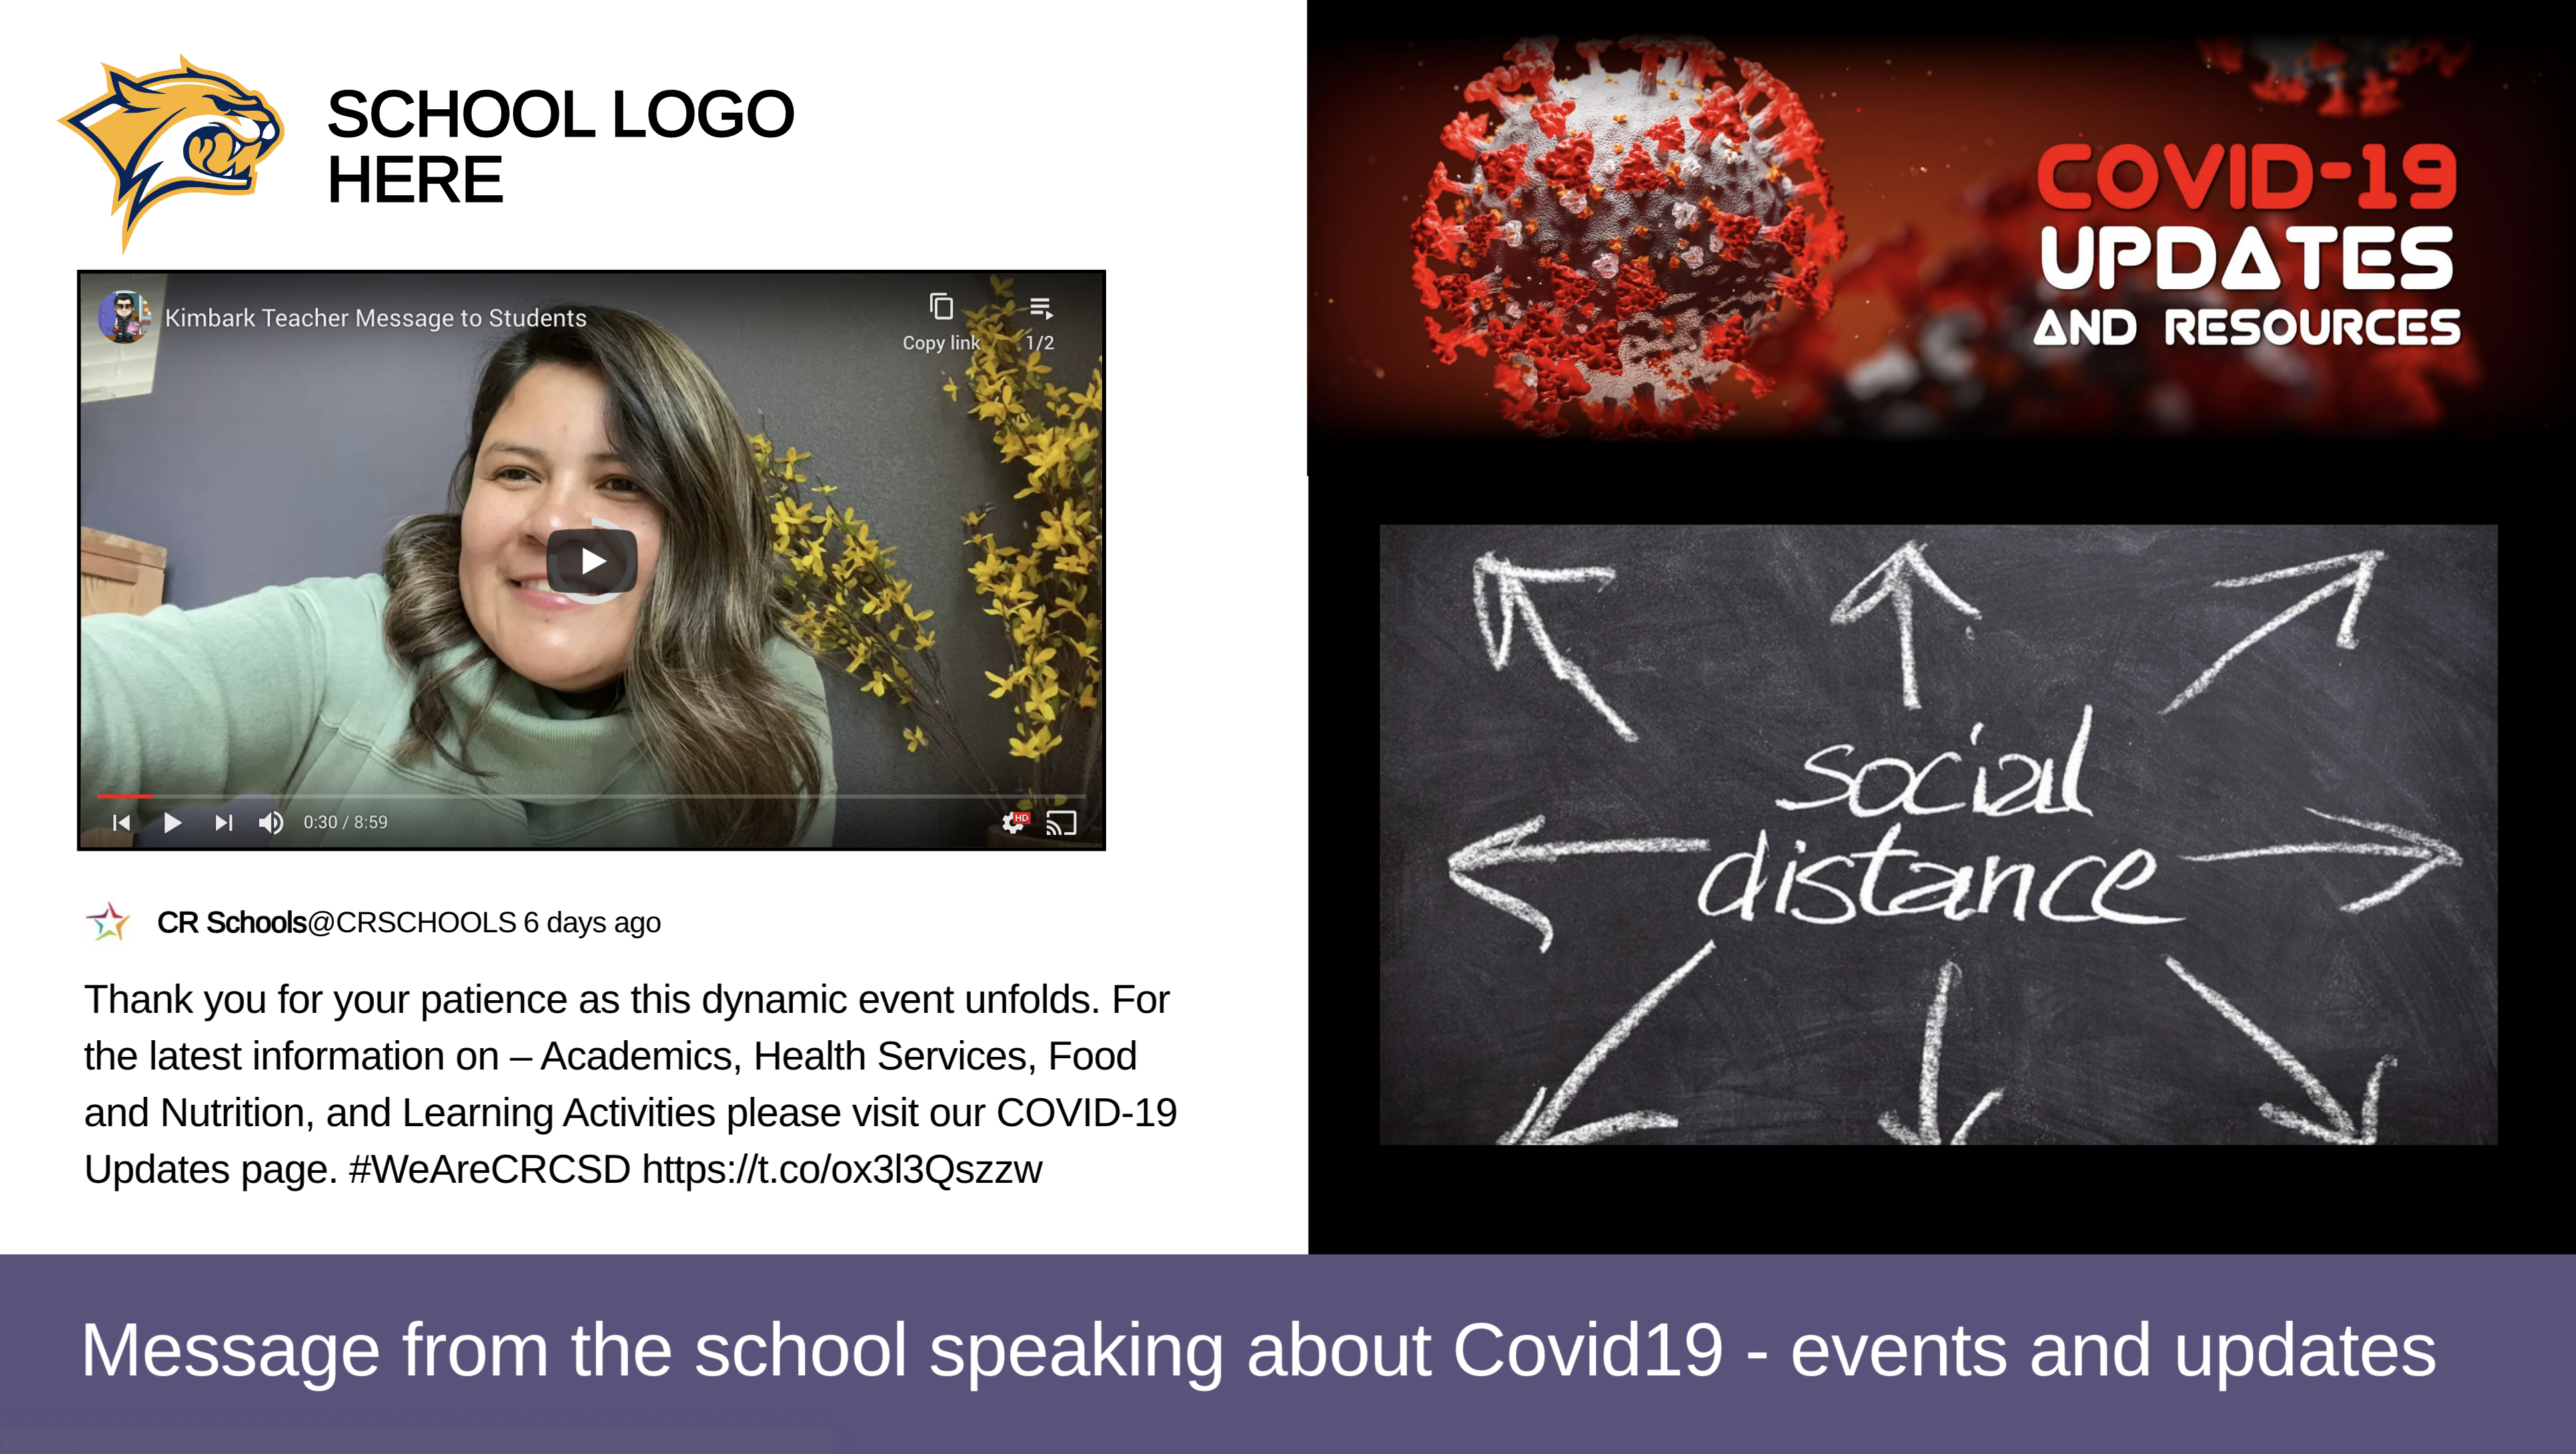 School Message COVID-19 Template For Digital Signage